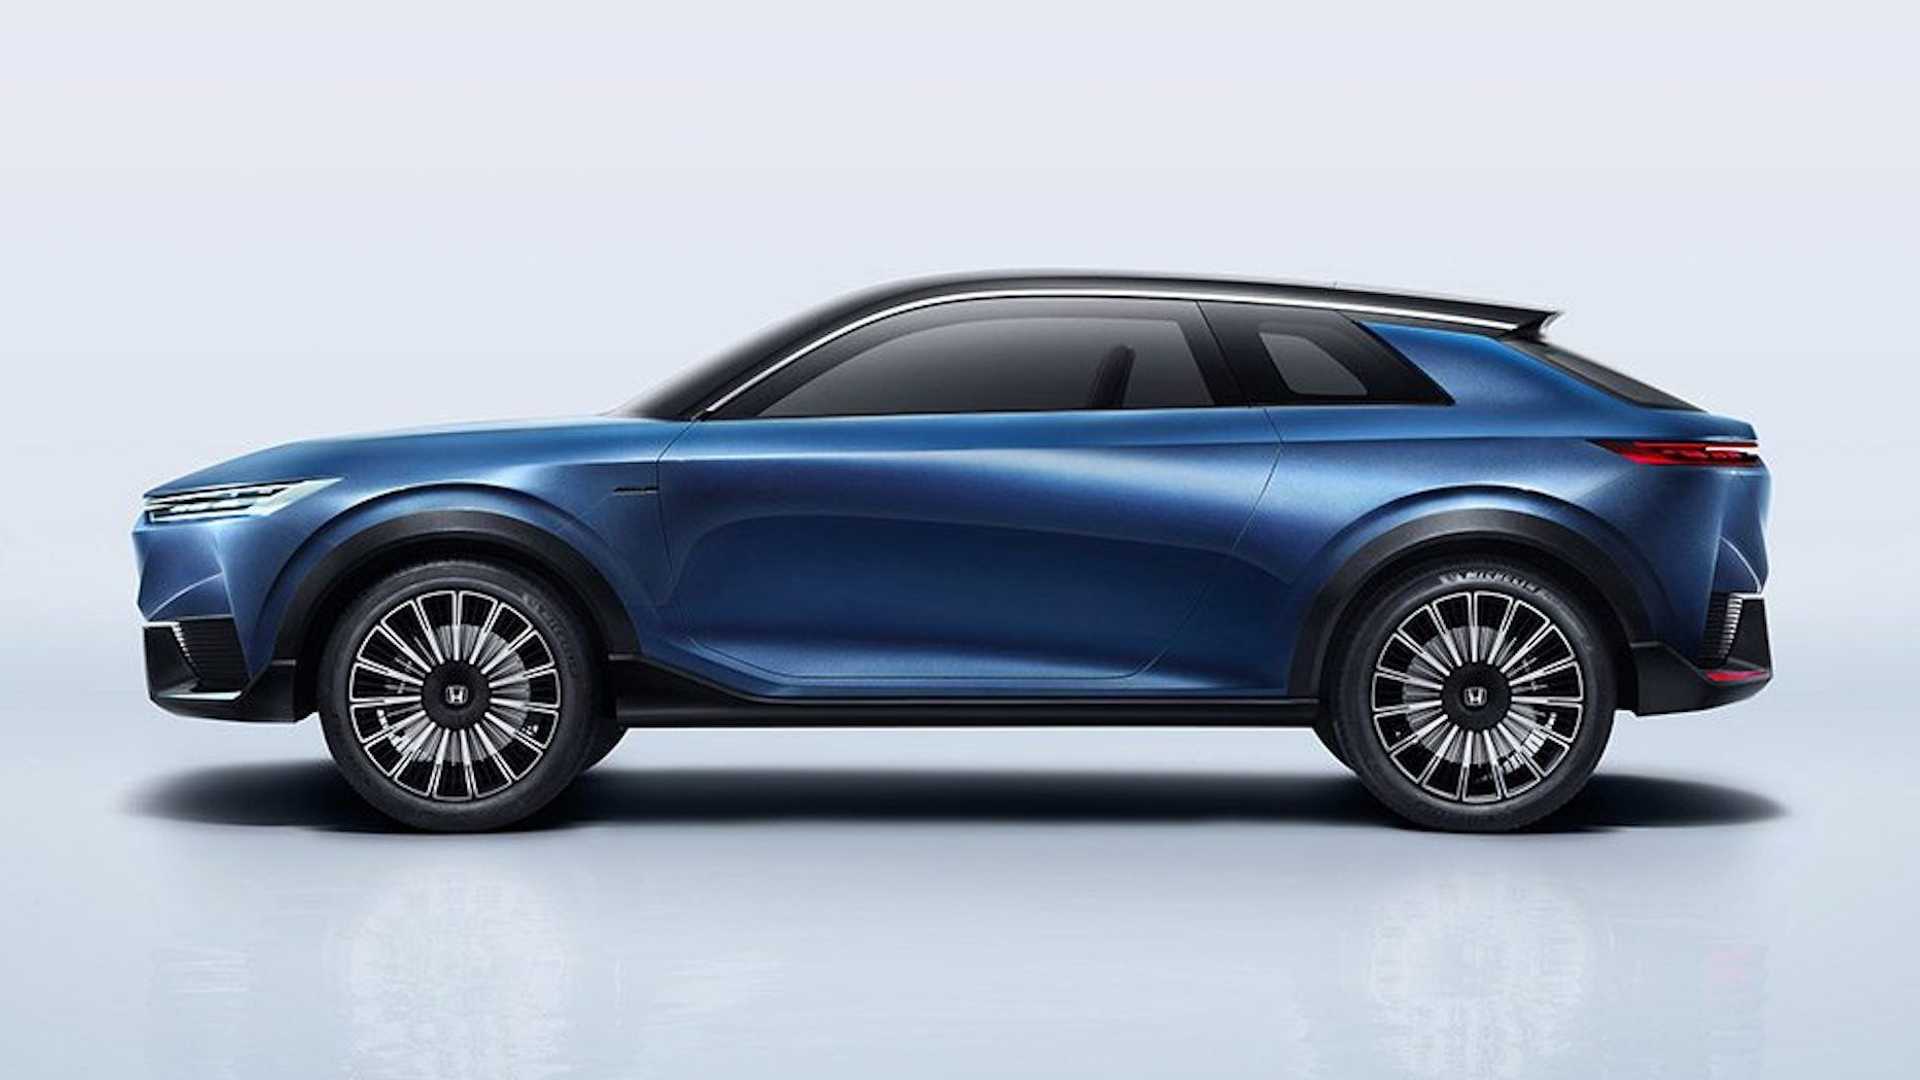 Honda Electric SUV Concept Previews "Future Mass-Production Model" for ...